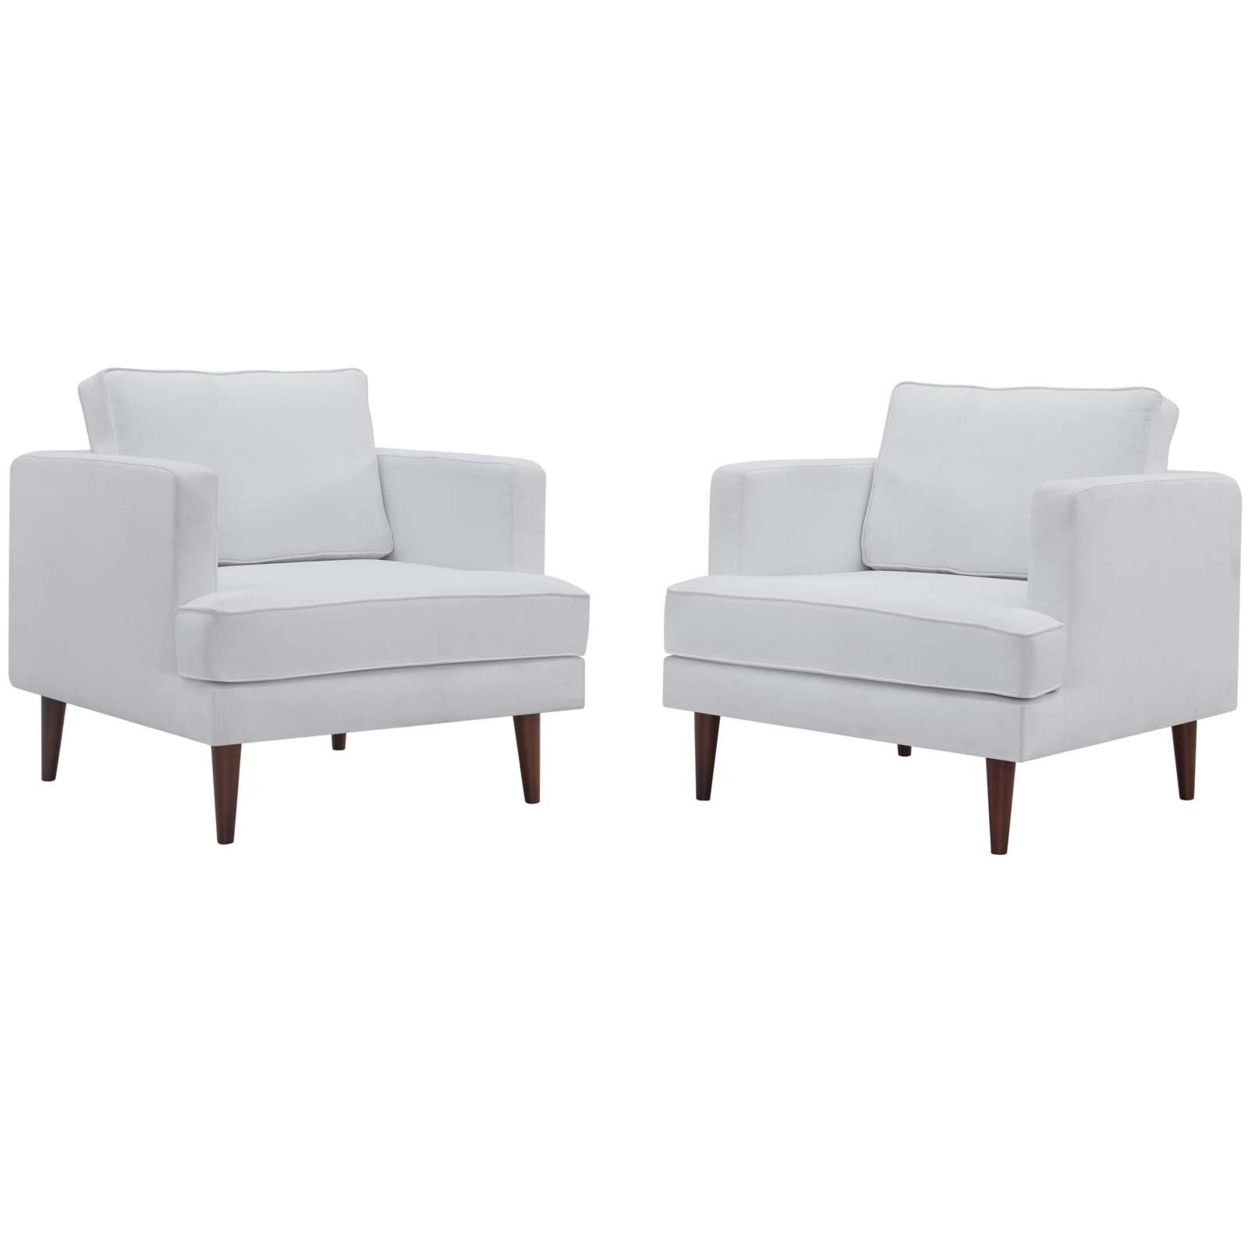 Agile Upholstered Fabric Armchair Set Of 2, White